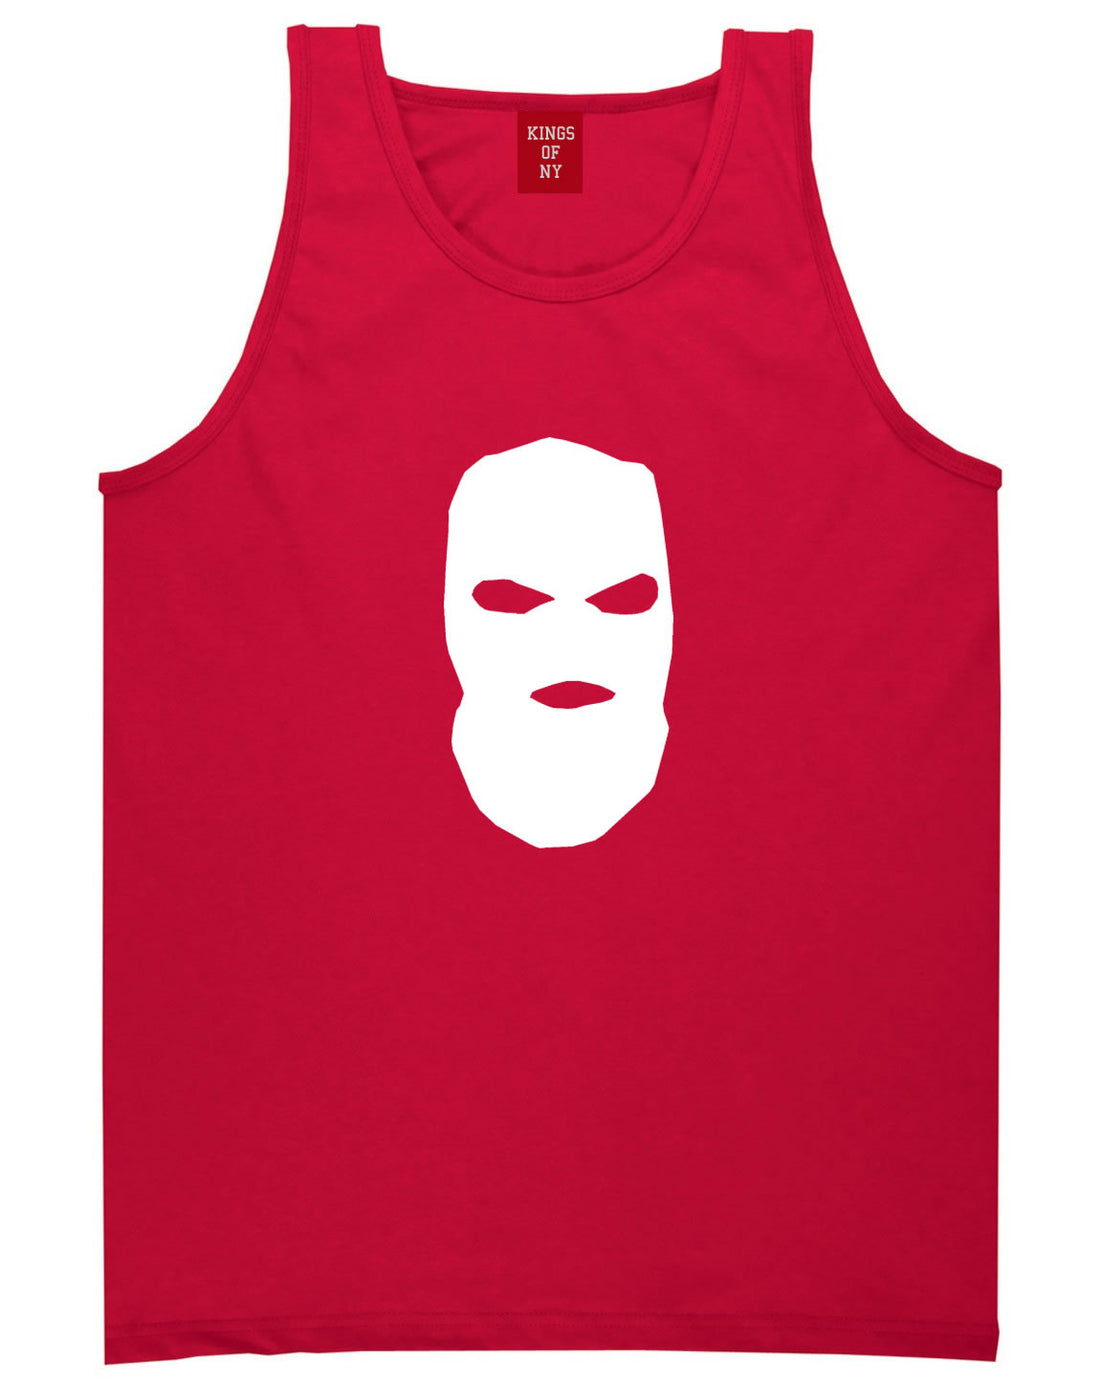 Ski Mask Way Robber Tank Top in Red By Kings Of NY